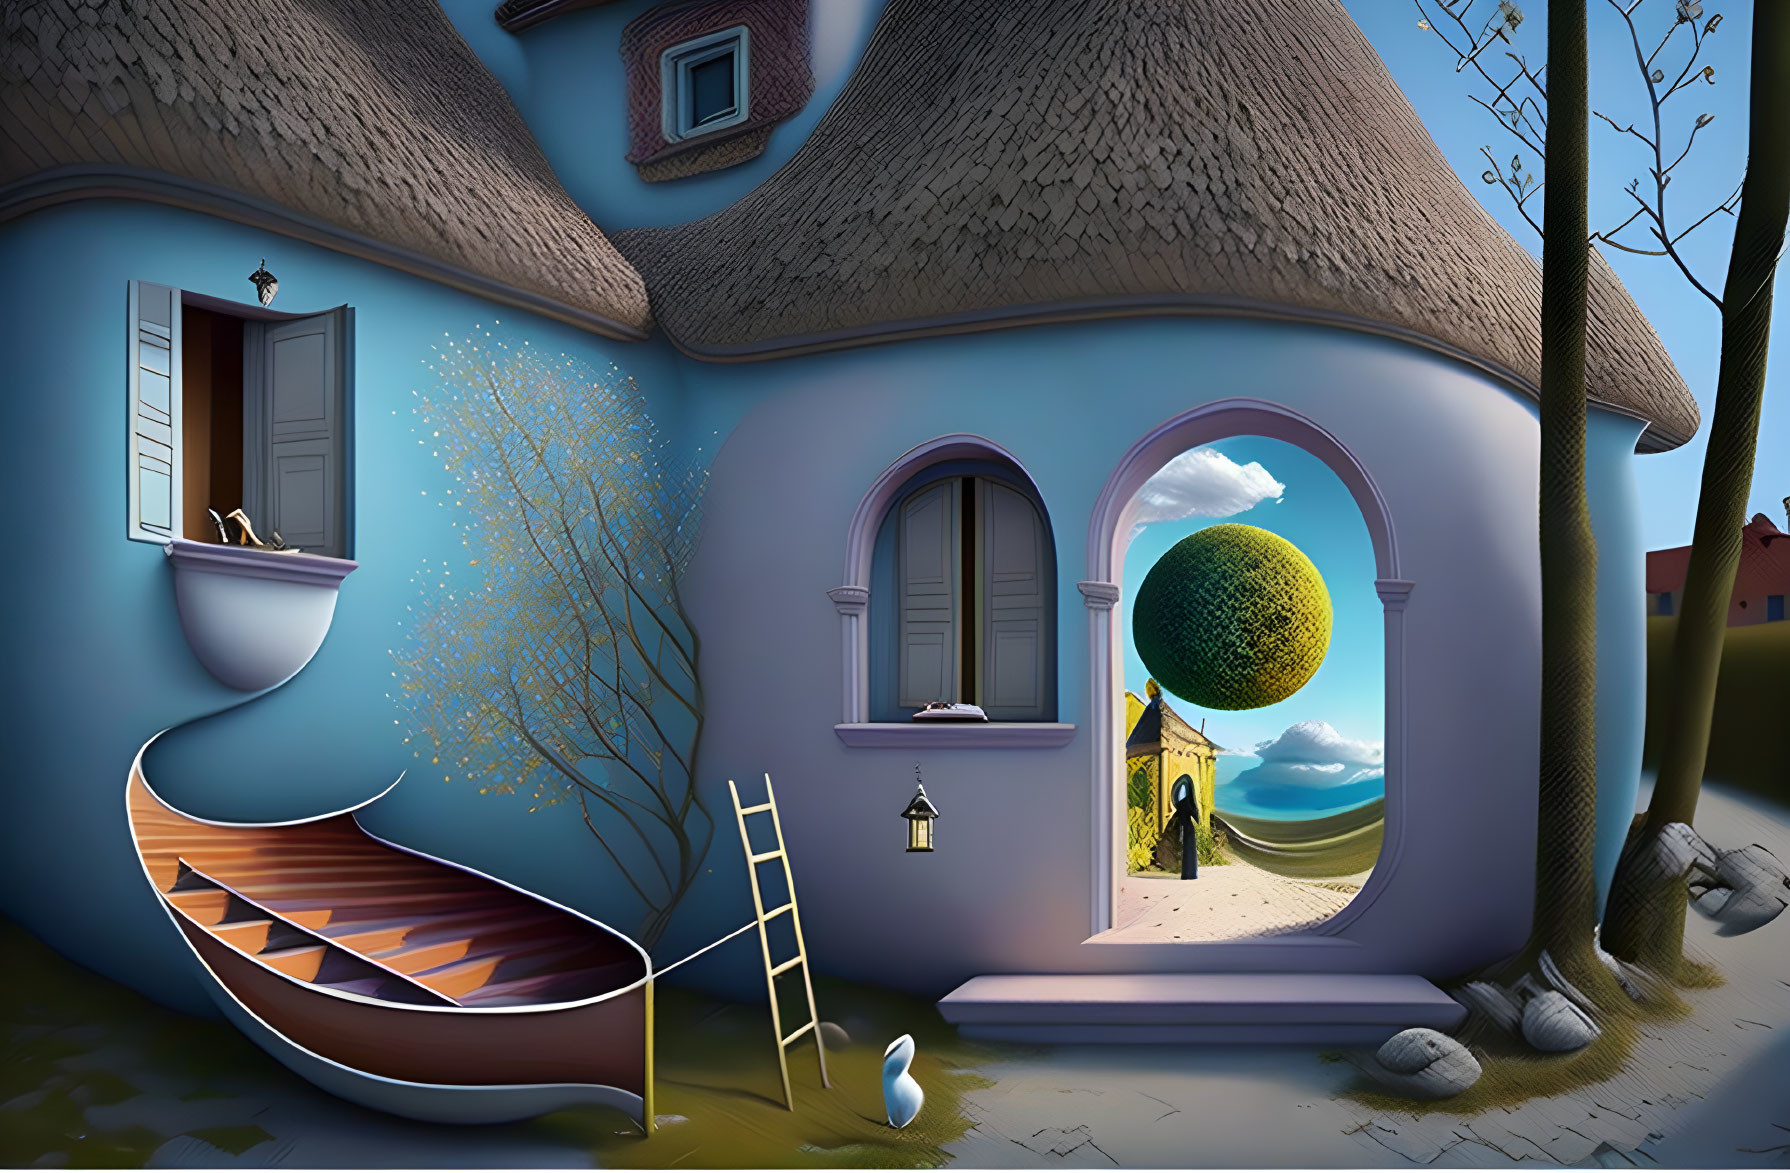 Surreal digital artwork: whimsical house with circular windows, boat, ladder, countryside view,